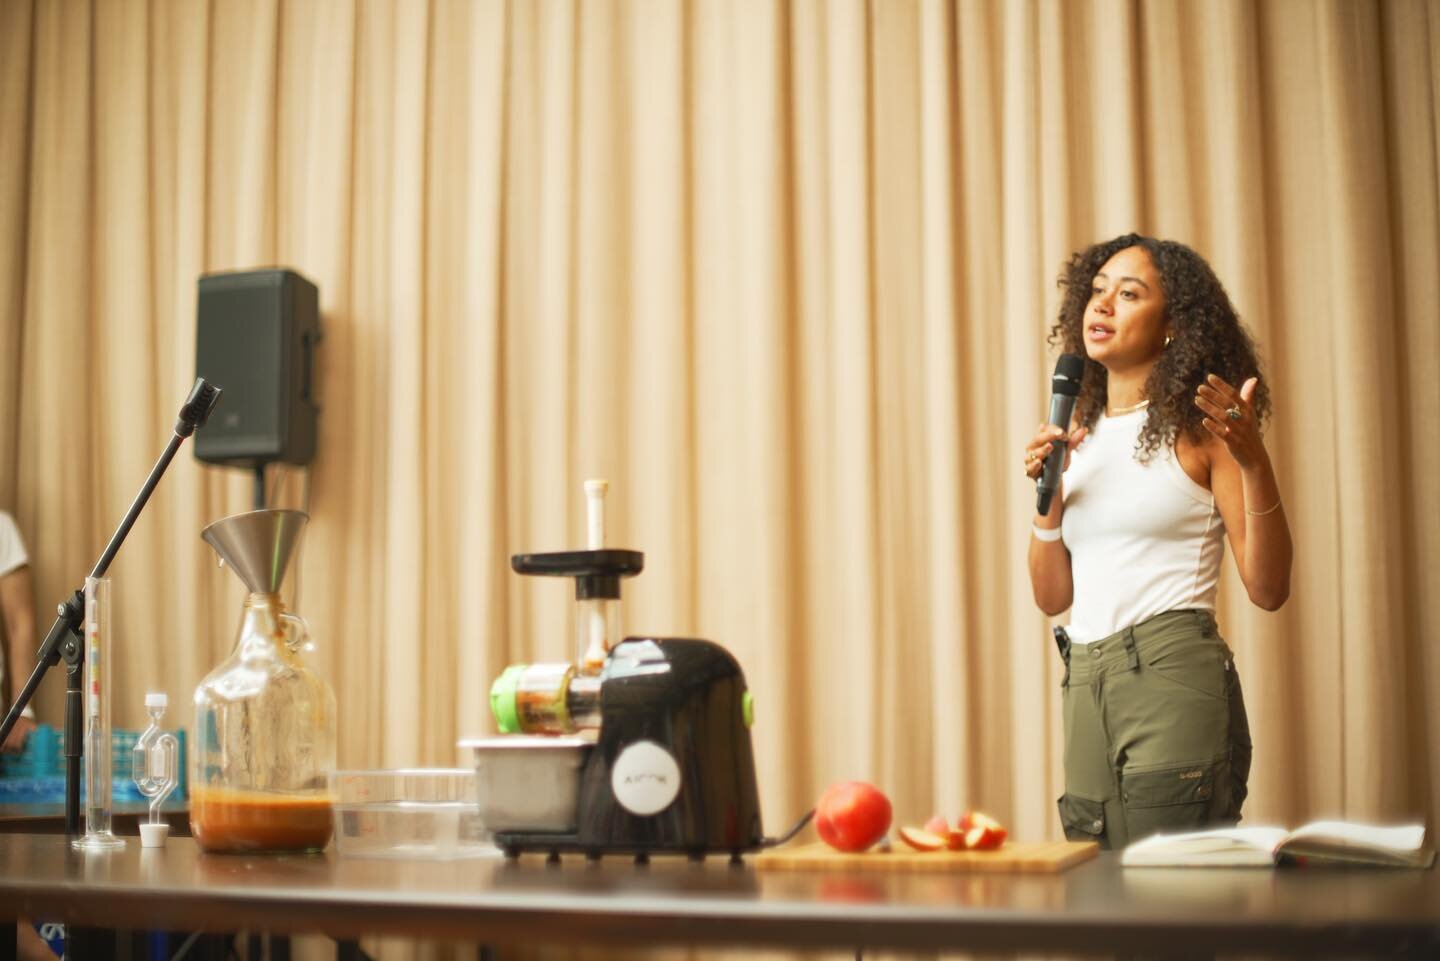 ABV Volume 3 in Brooklyn, NYC. We demonstrated a workshop on accesible home fermentations using peaches, the seasonal fruit of the summer. Moderated by the best MC @zwanng + produced by dream team @jahdemarley.drinks, @thebellejustine + @abvferments 